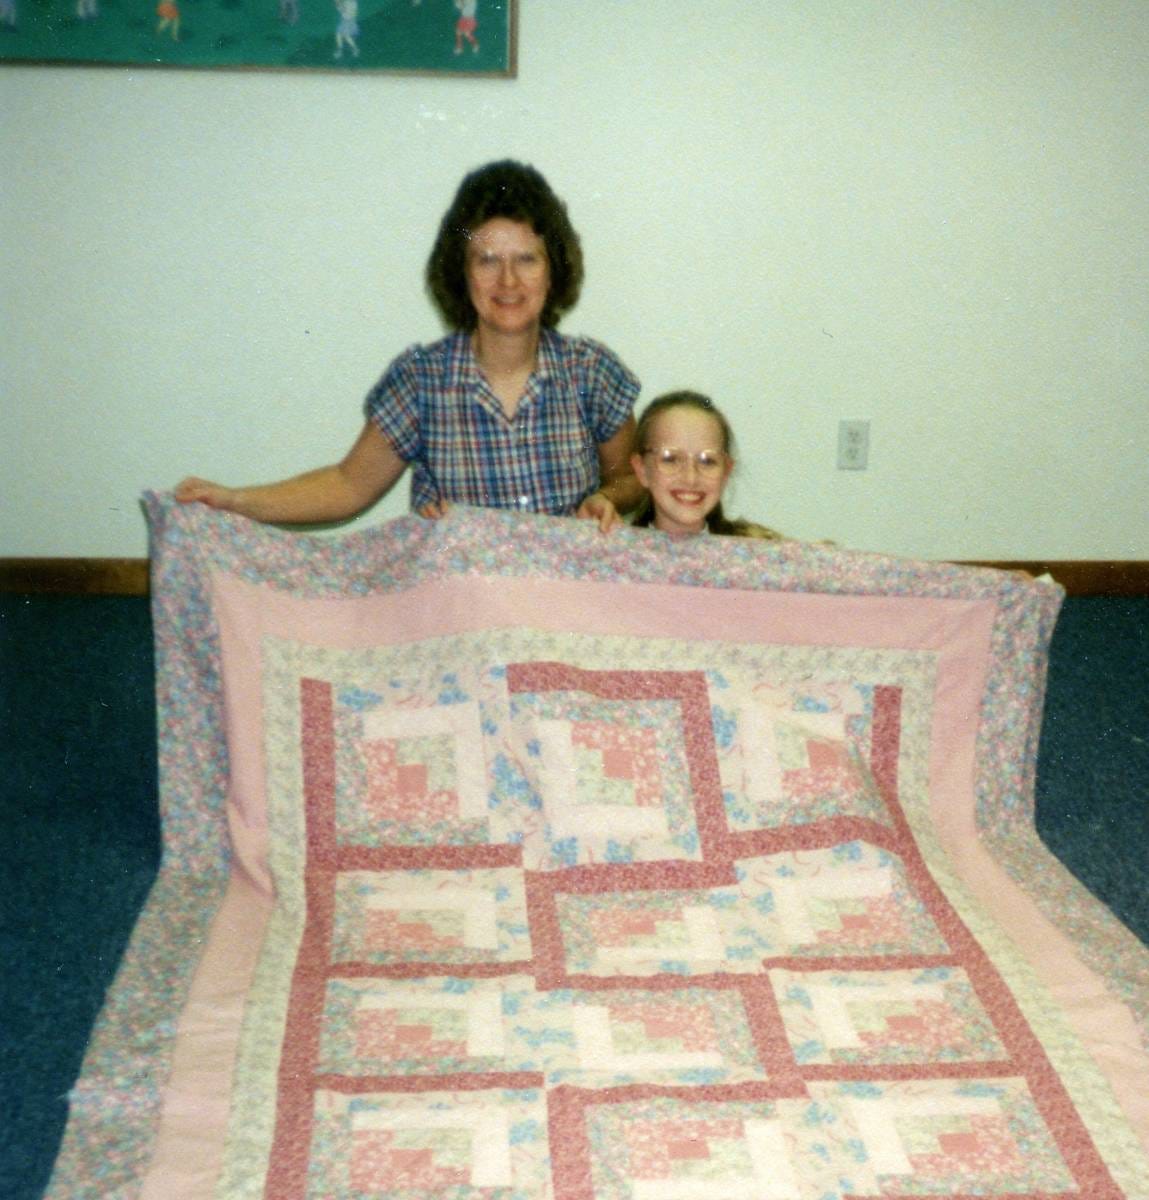 Old photo of Joy and her mother proudly sharing Joy's first quilt